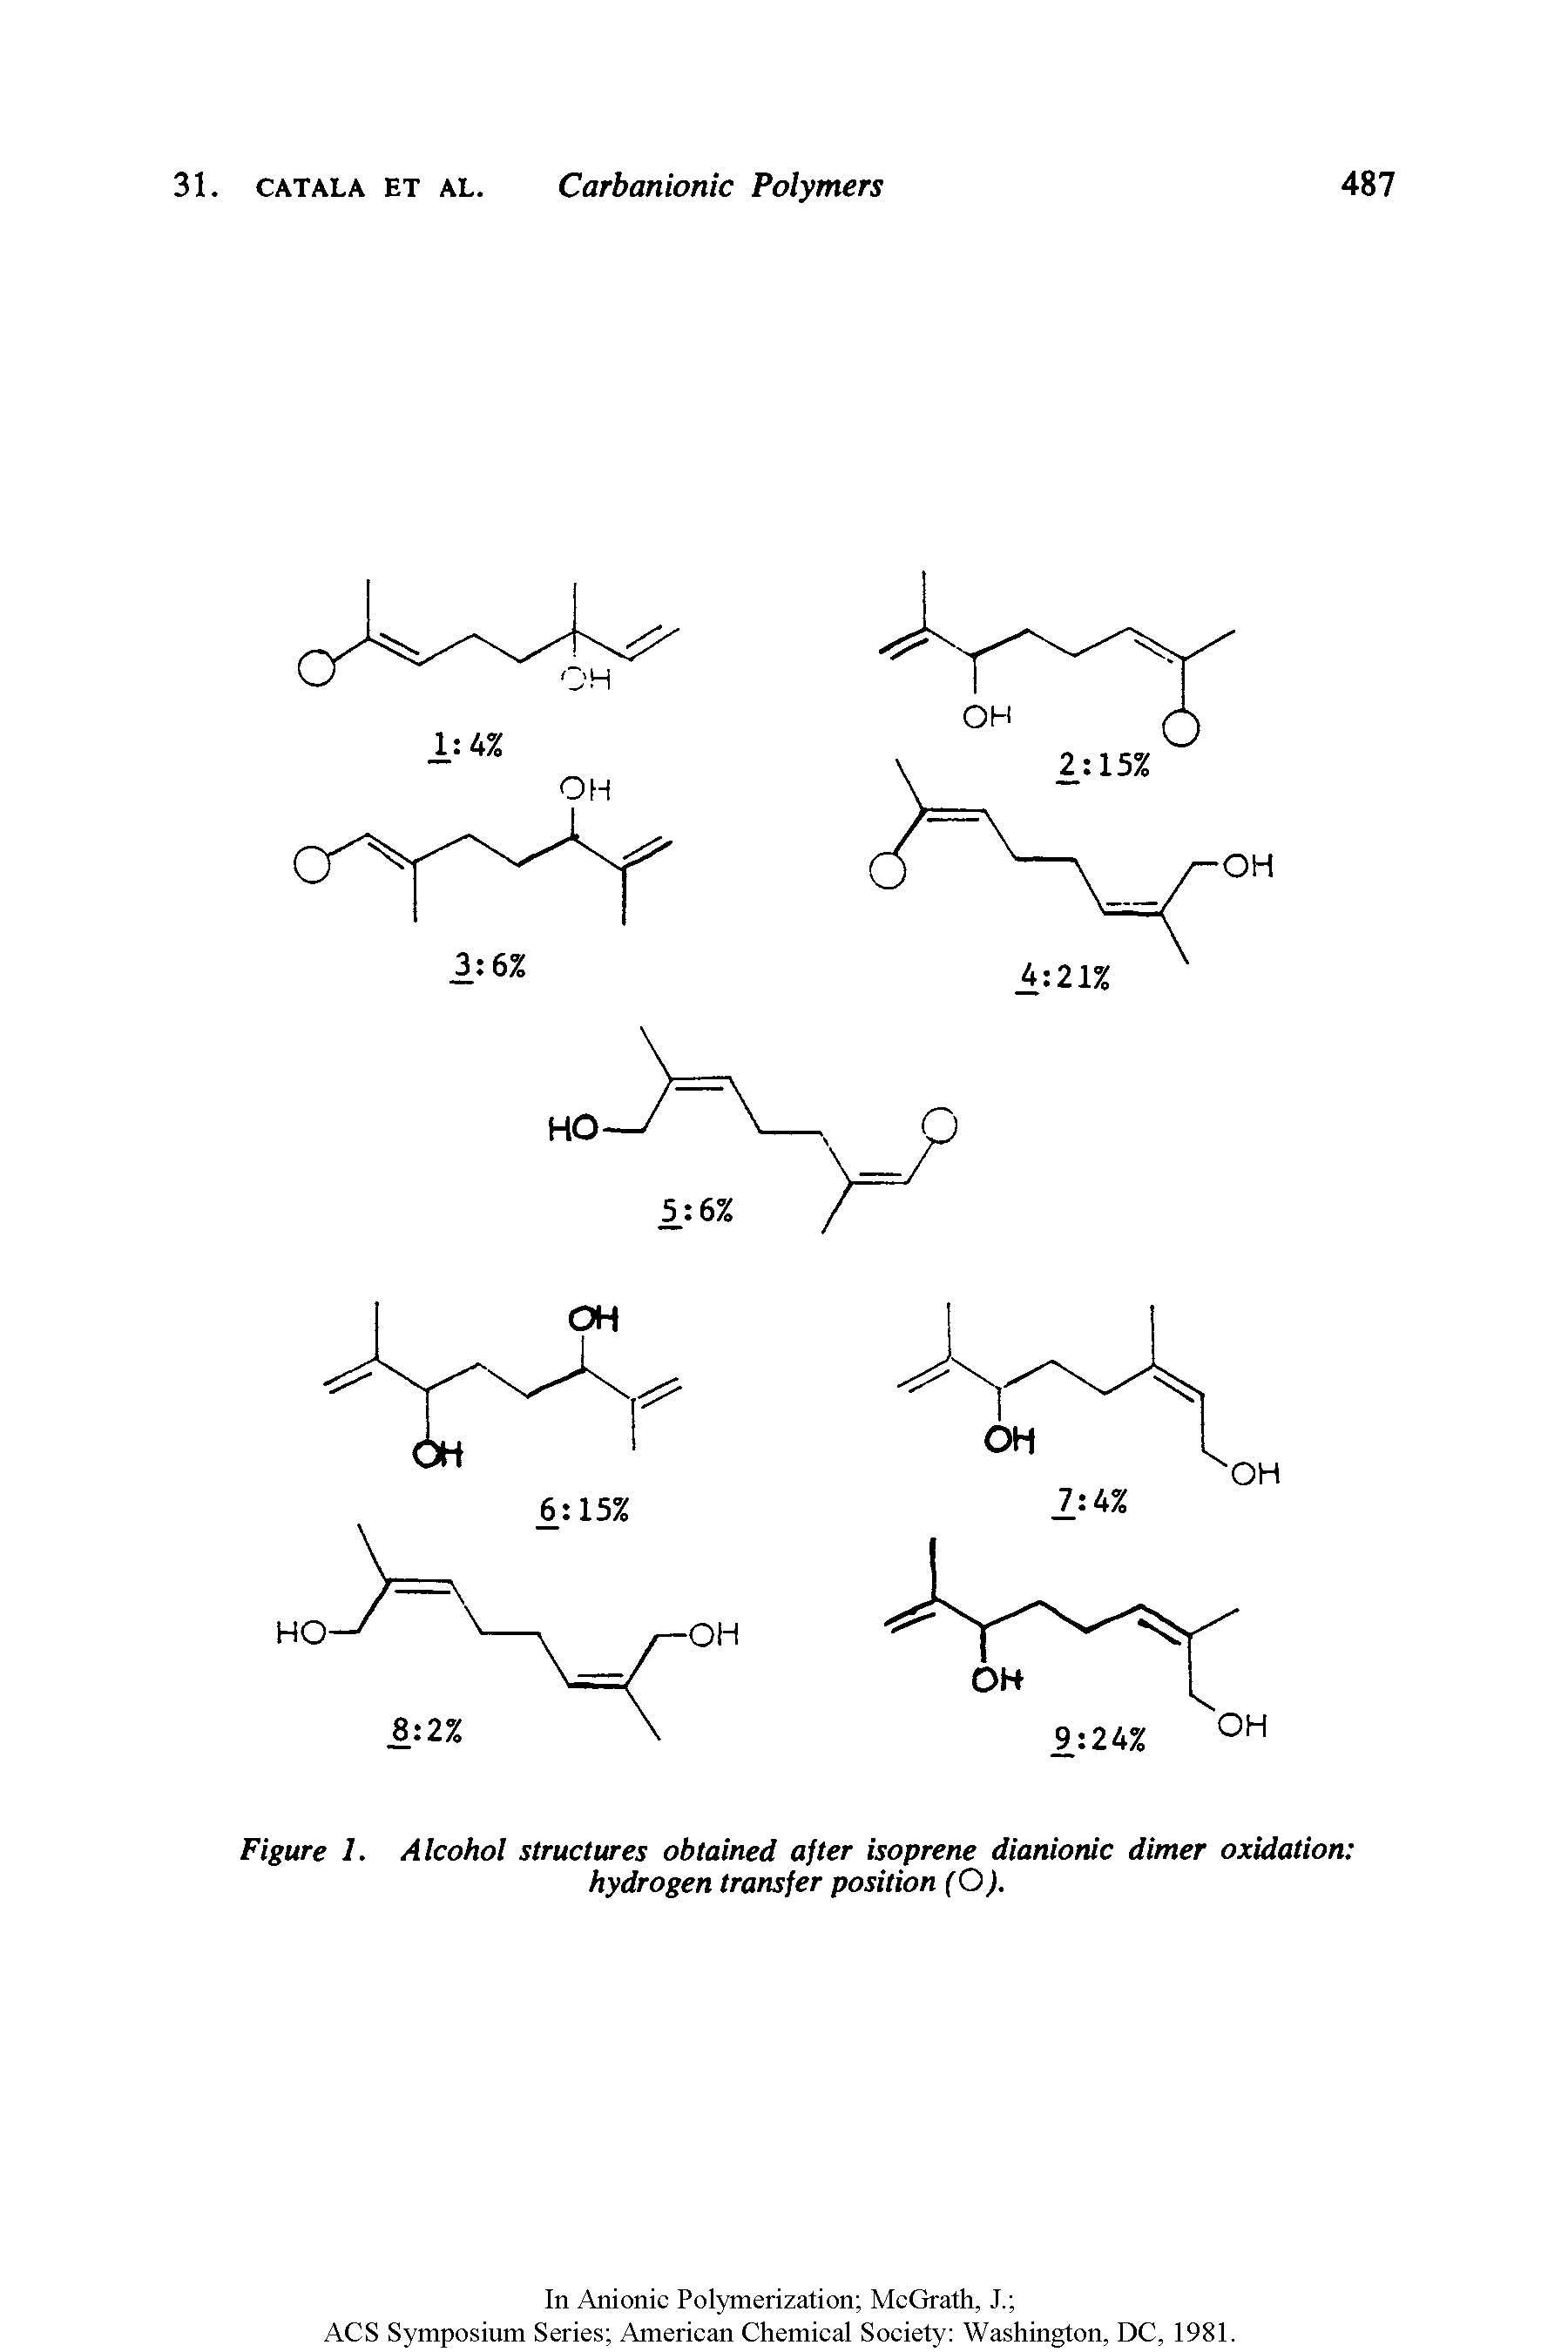 Figure 1. Alcohol structures obtained after isoprene dianionic dimer oxidation hydrogen transfer position (O).